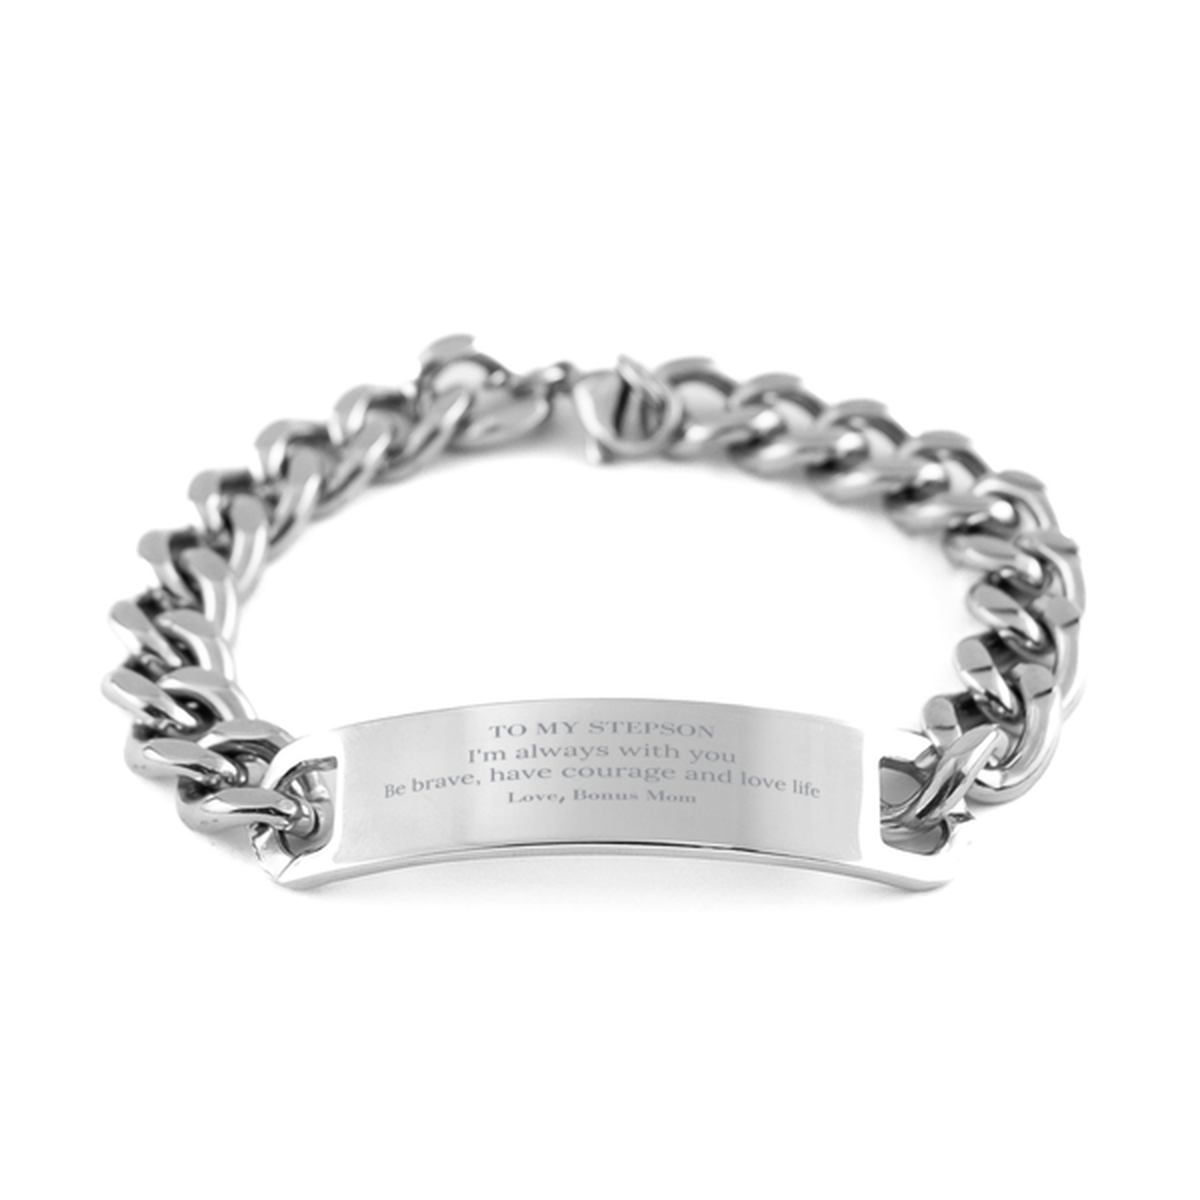 To My Stepson Gifts from Bonus Mom, Unique Cuban Chain Stainless Steel Bracelet Inspirational Christmas Birthday Graduation Gifts for Stepson I'm always with you. Be brave, have courage and love life. Love, Bonus Mom